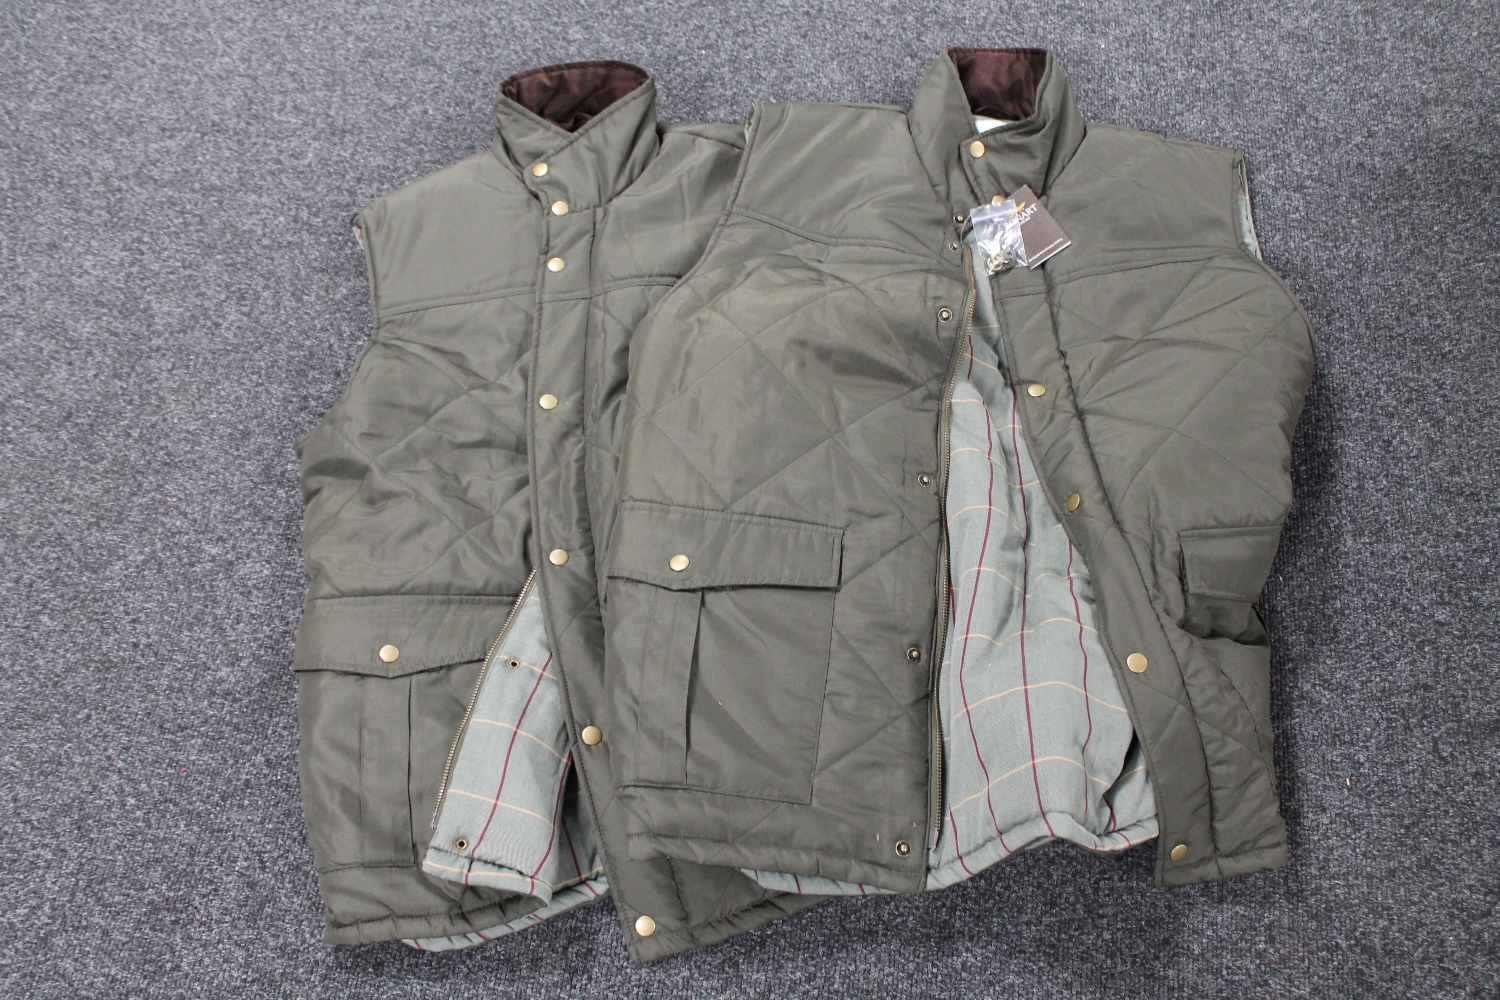 Two Bonart gilets - new with tags,